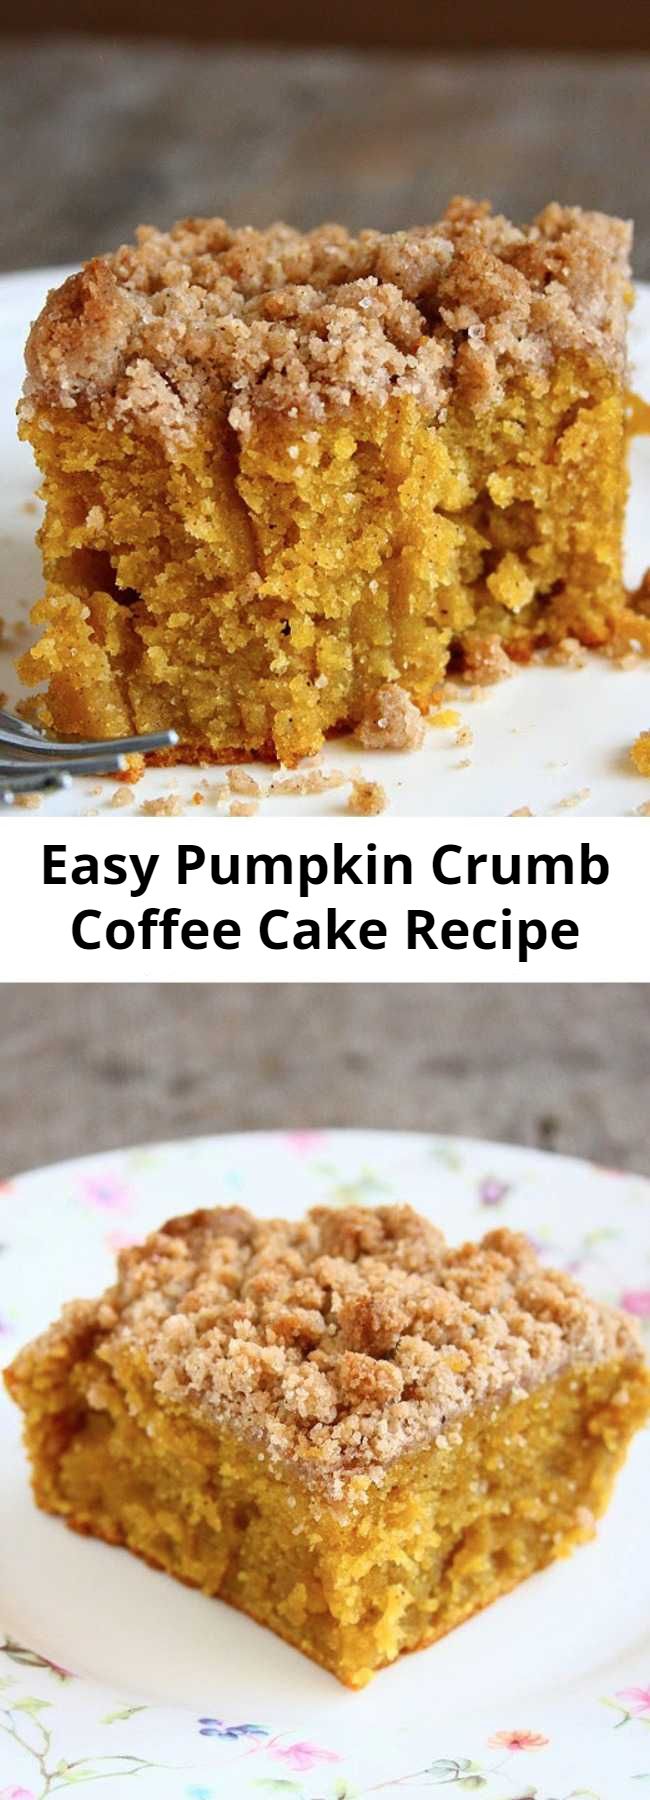 Easy Pumpkin Crumb Coffee Cake Recipe - This was the moistest coffee cake EVER. I even wasn't sure if I can call this a coffee cake. This is insanely moist. And It keeps moist for days. It wasn't too sweet, too spicy, too dry, too moist. It had a perfect texture and a sweet, crunchy crumb topping. What else could you want??